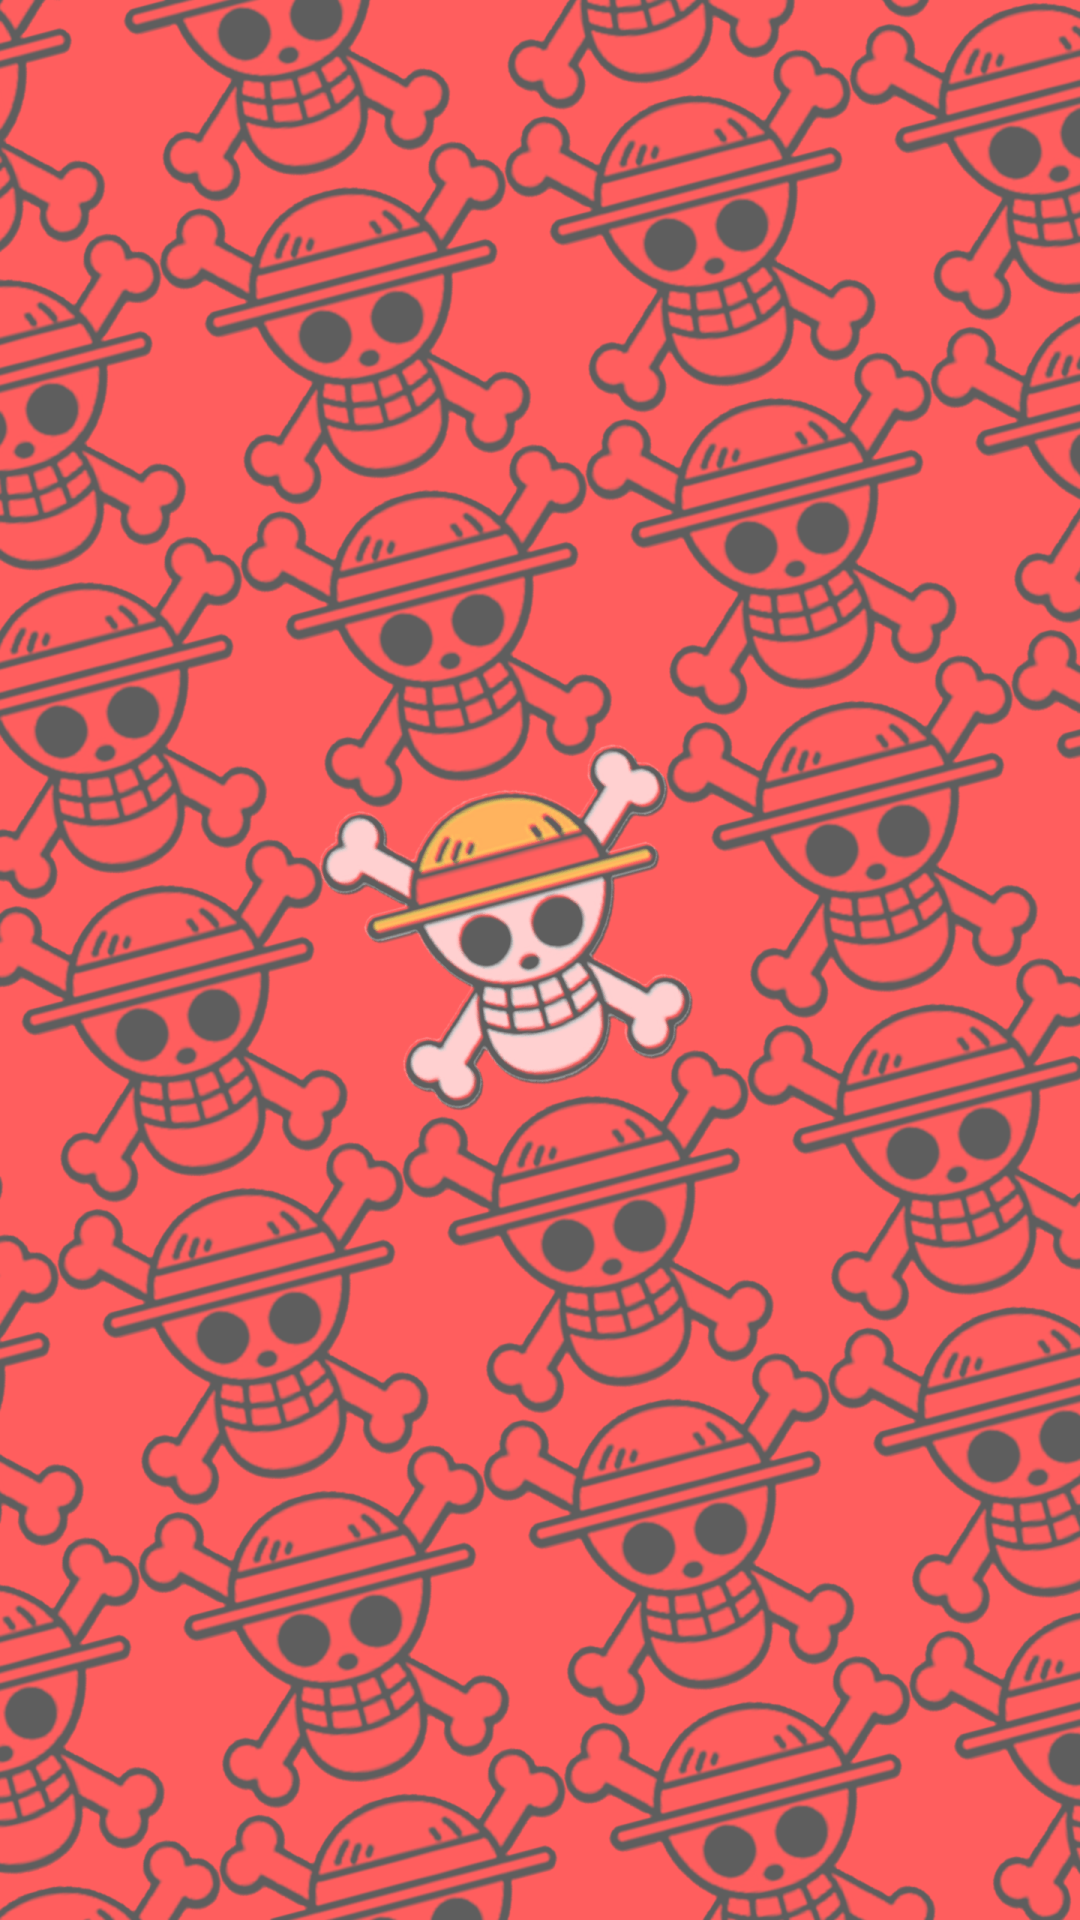 One Piece 2019 Wallpapers - Wallpaper Cave